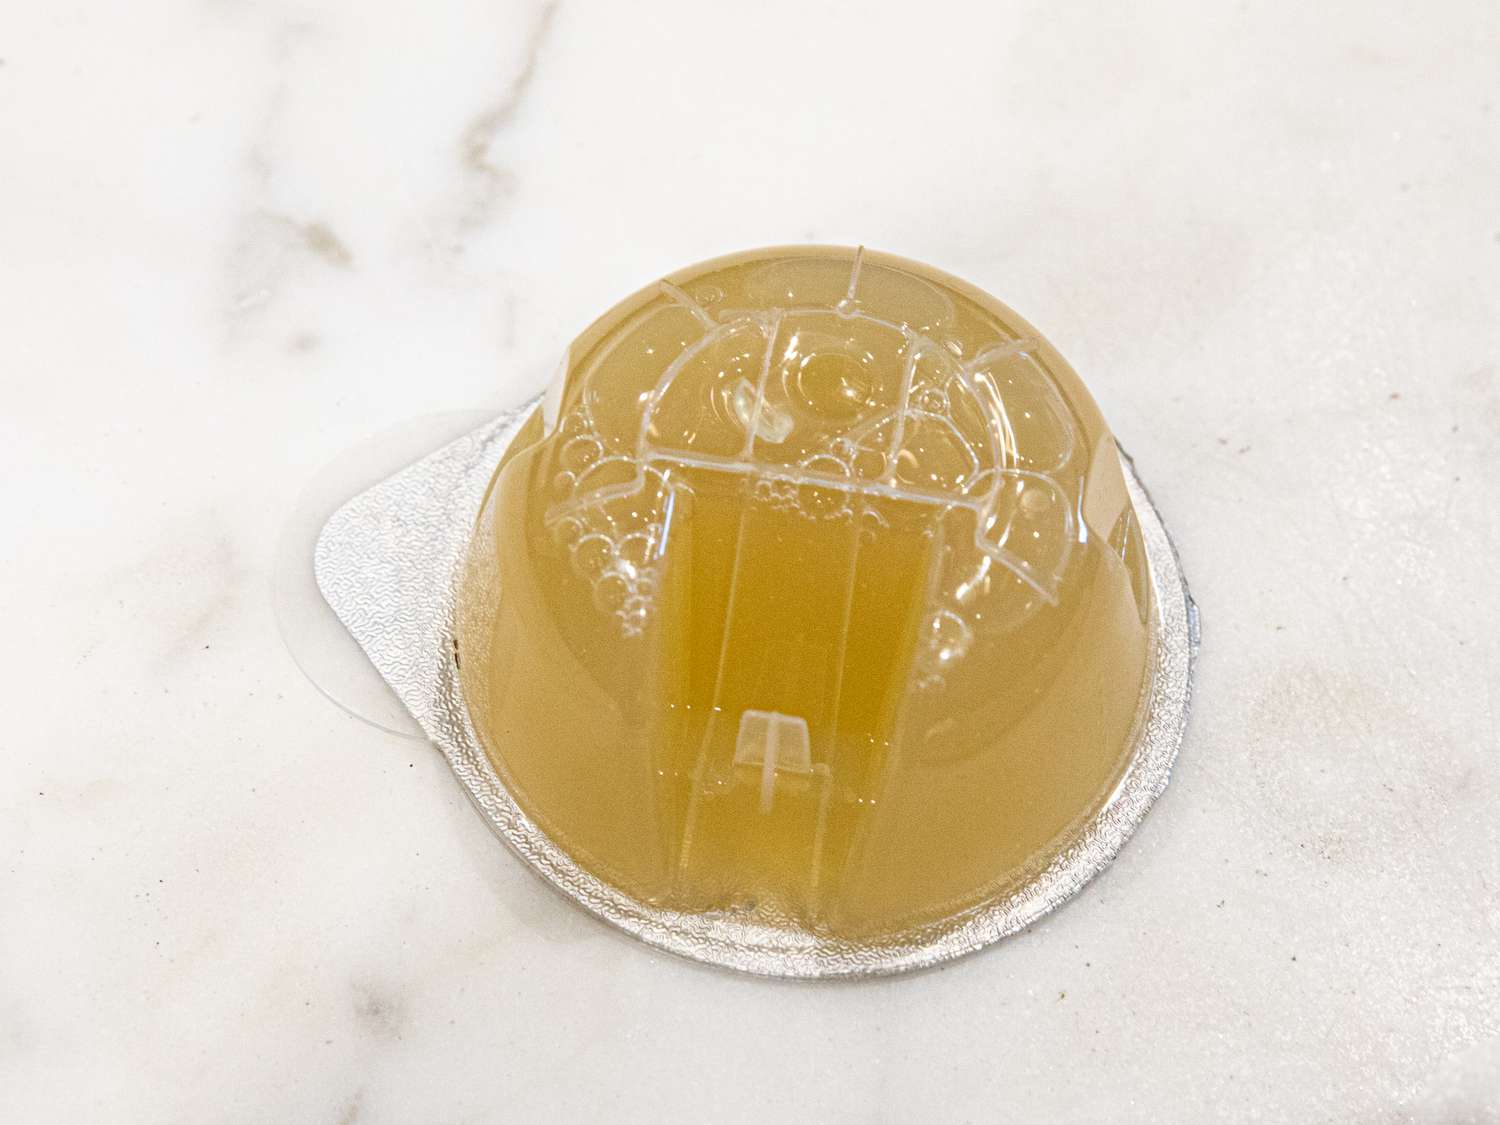 A closeup look at a Bartesian cocktail pod that's sitting on a marble surface